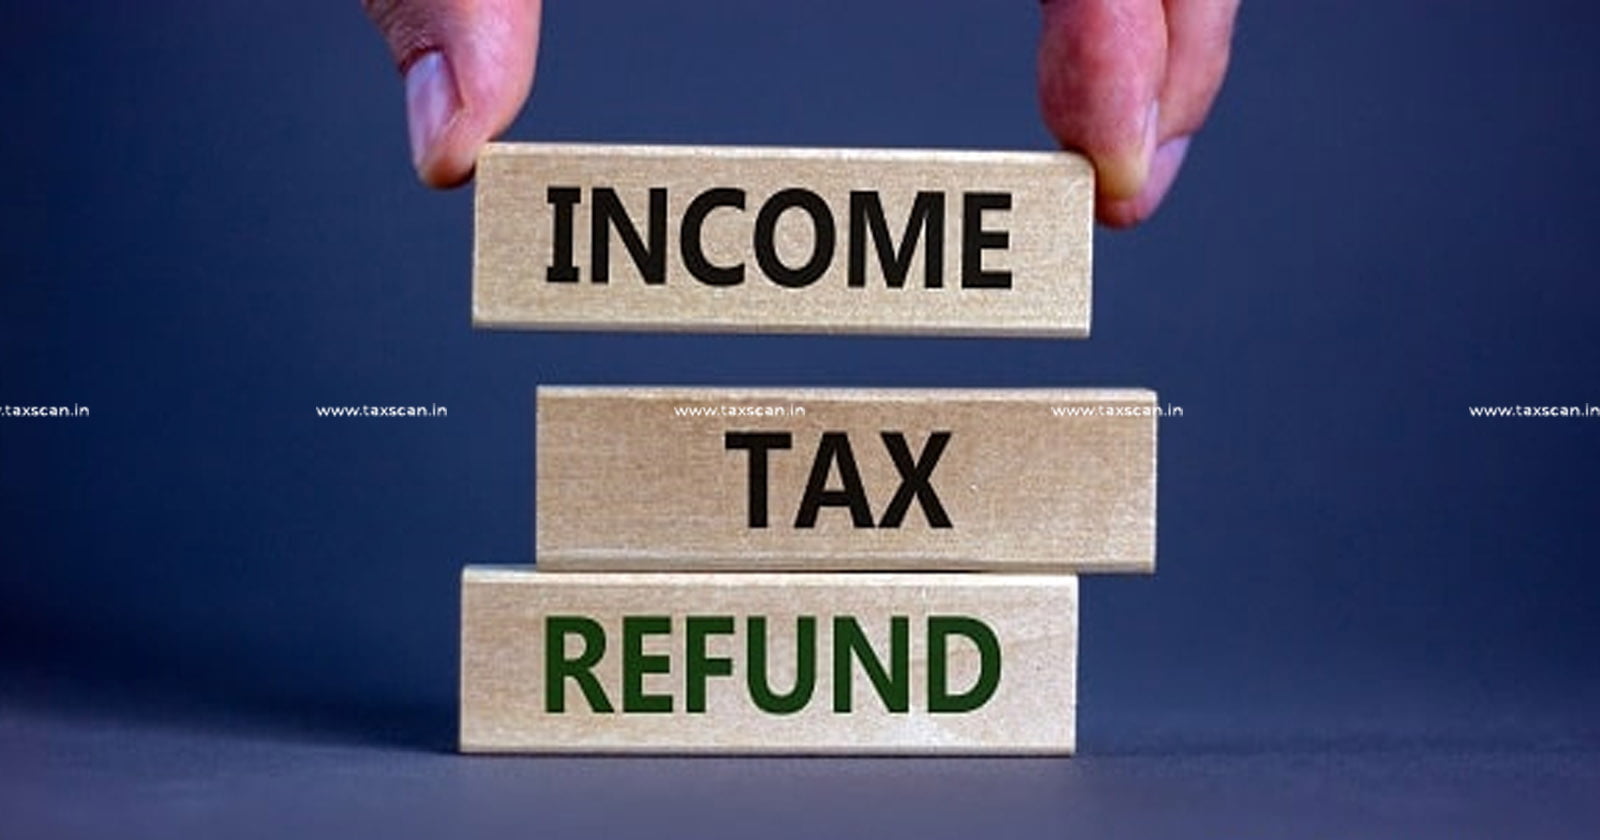 ITR - Filing due date nearing - Income Tax Refund - TAXSCAN